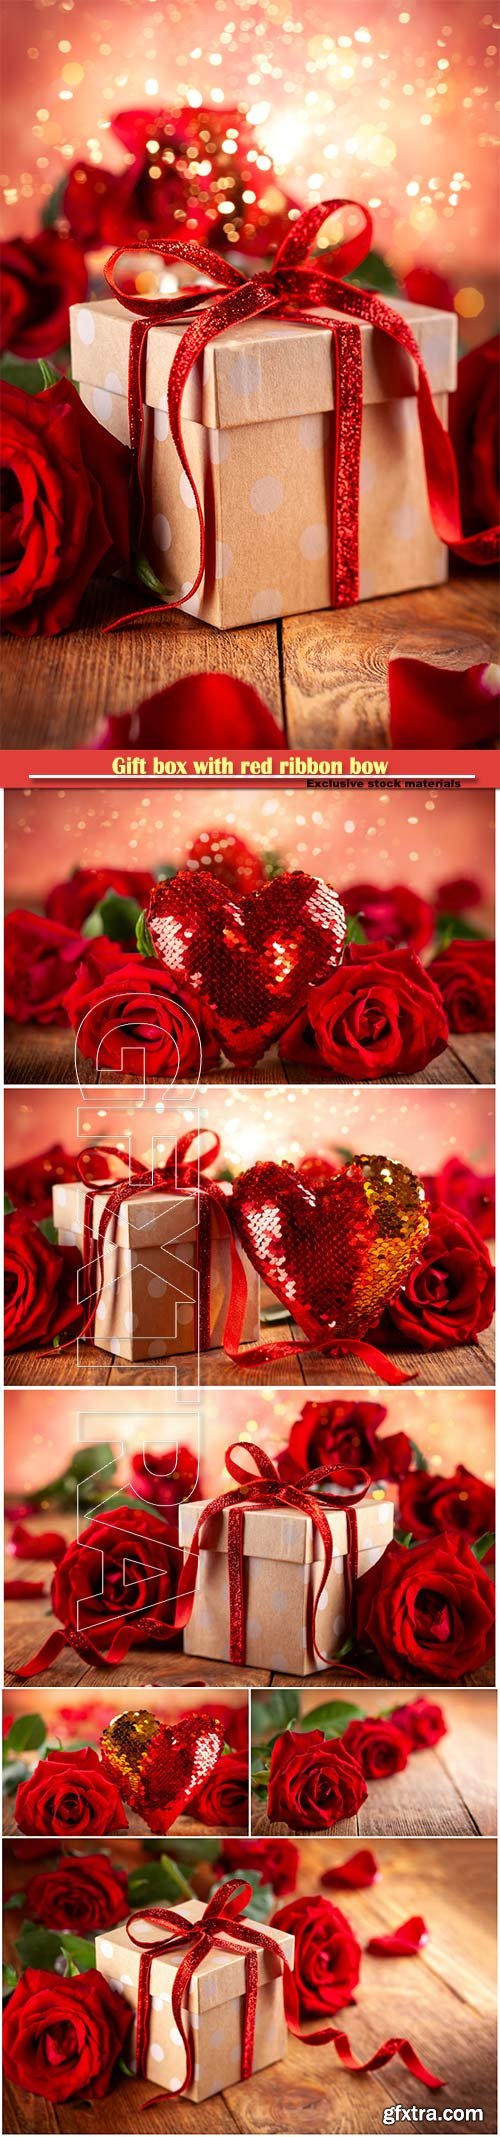 Gift box with red ribbon bow, heart and red roses